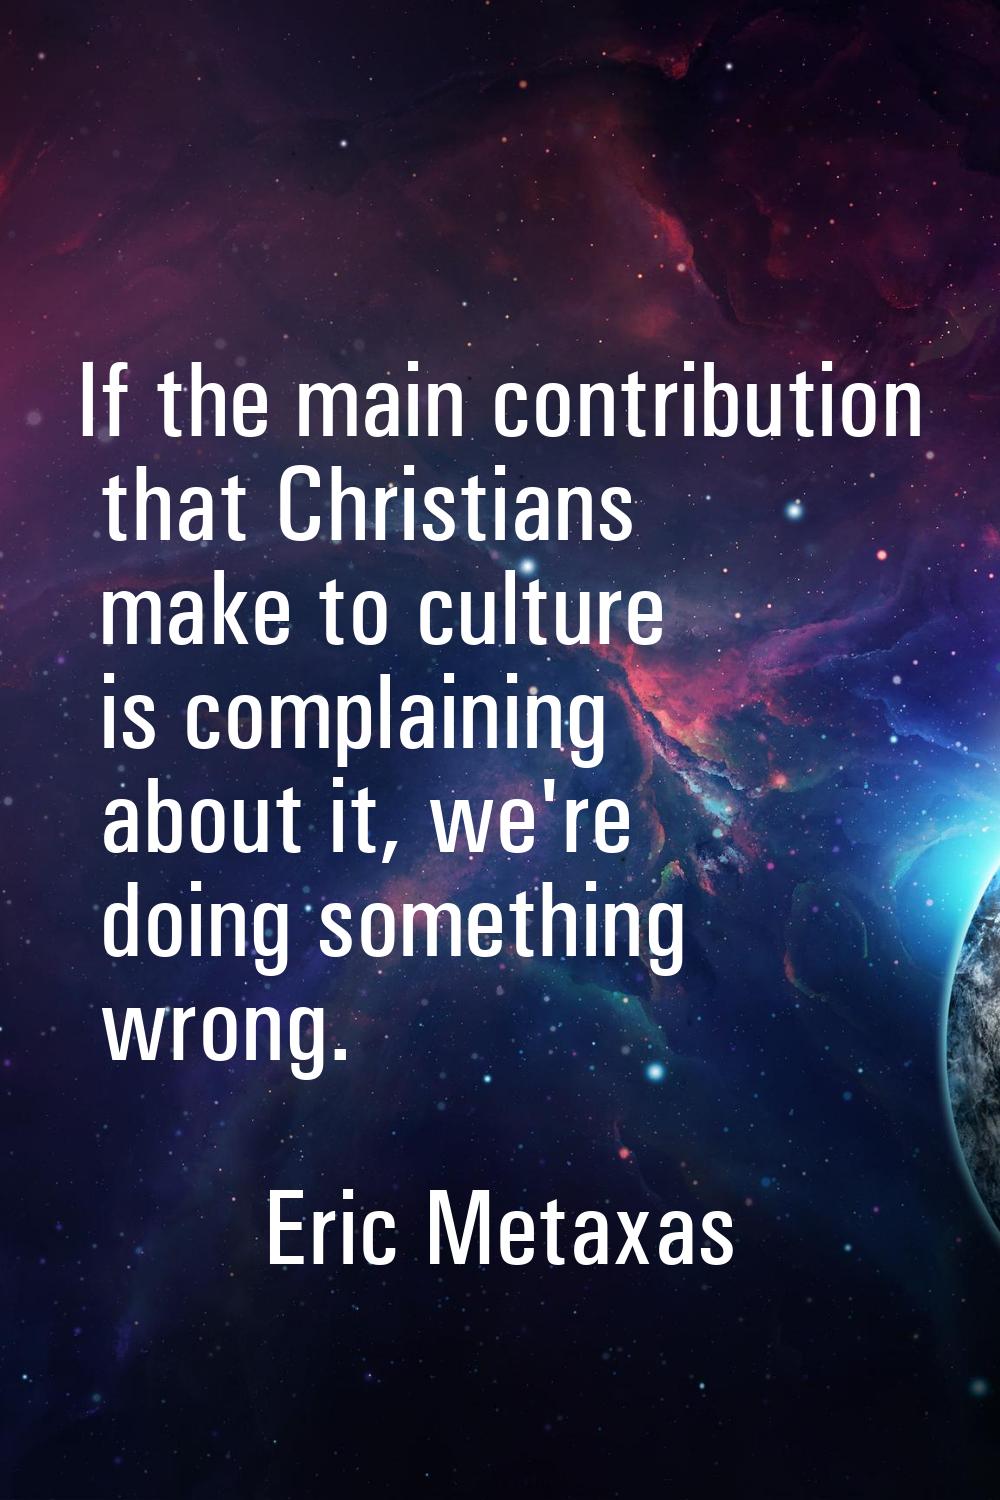 If the main contribution that Christians make to culture is complaining about it, we're doing somet